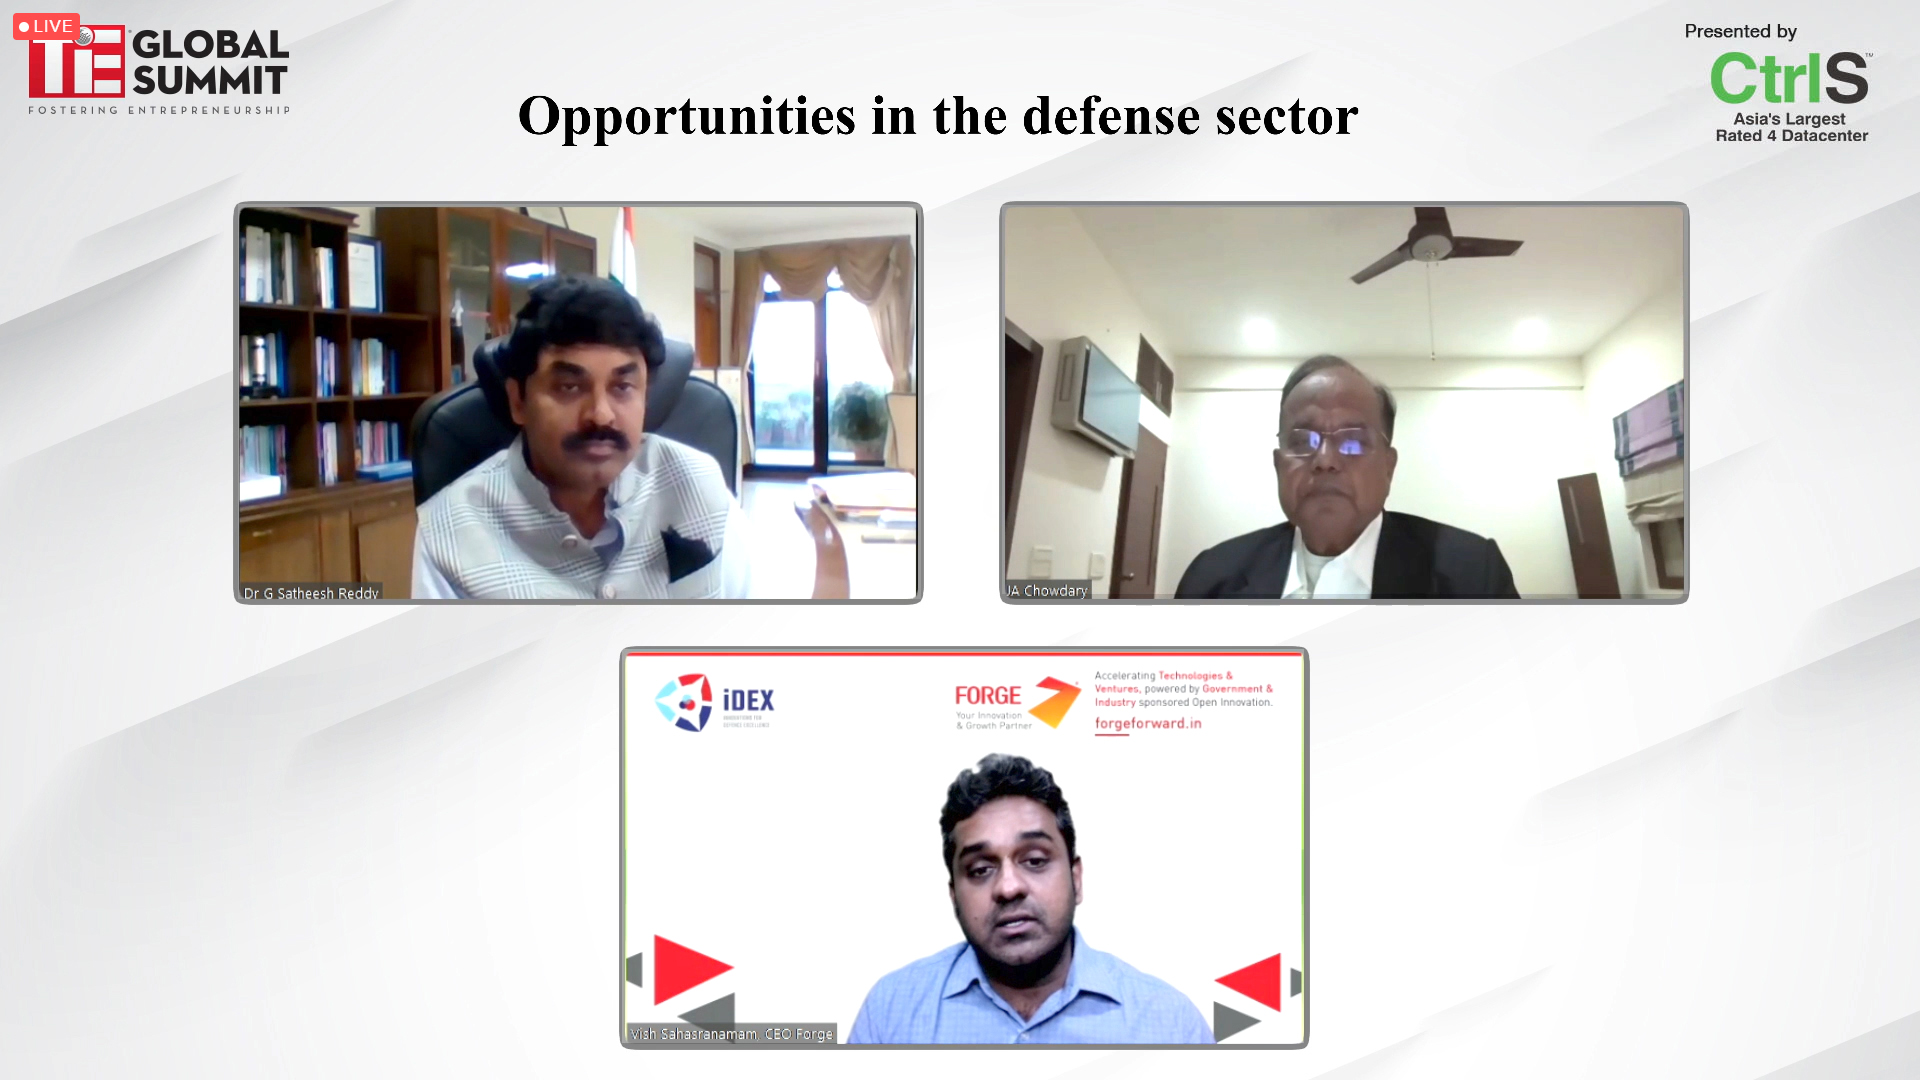 G Satheesh Reddy, JA Chowdhary, Vish Sahasranamam in Panel discussion on Opportunities in Defence Sector